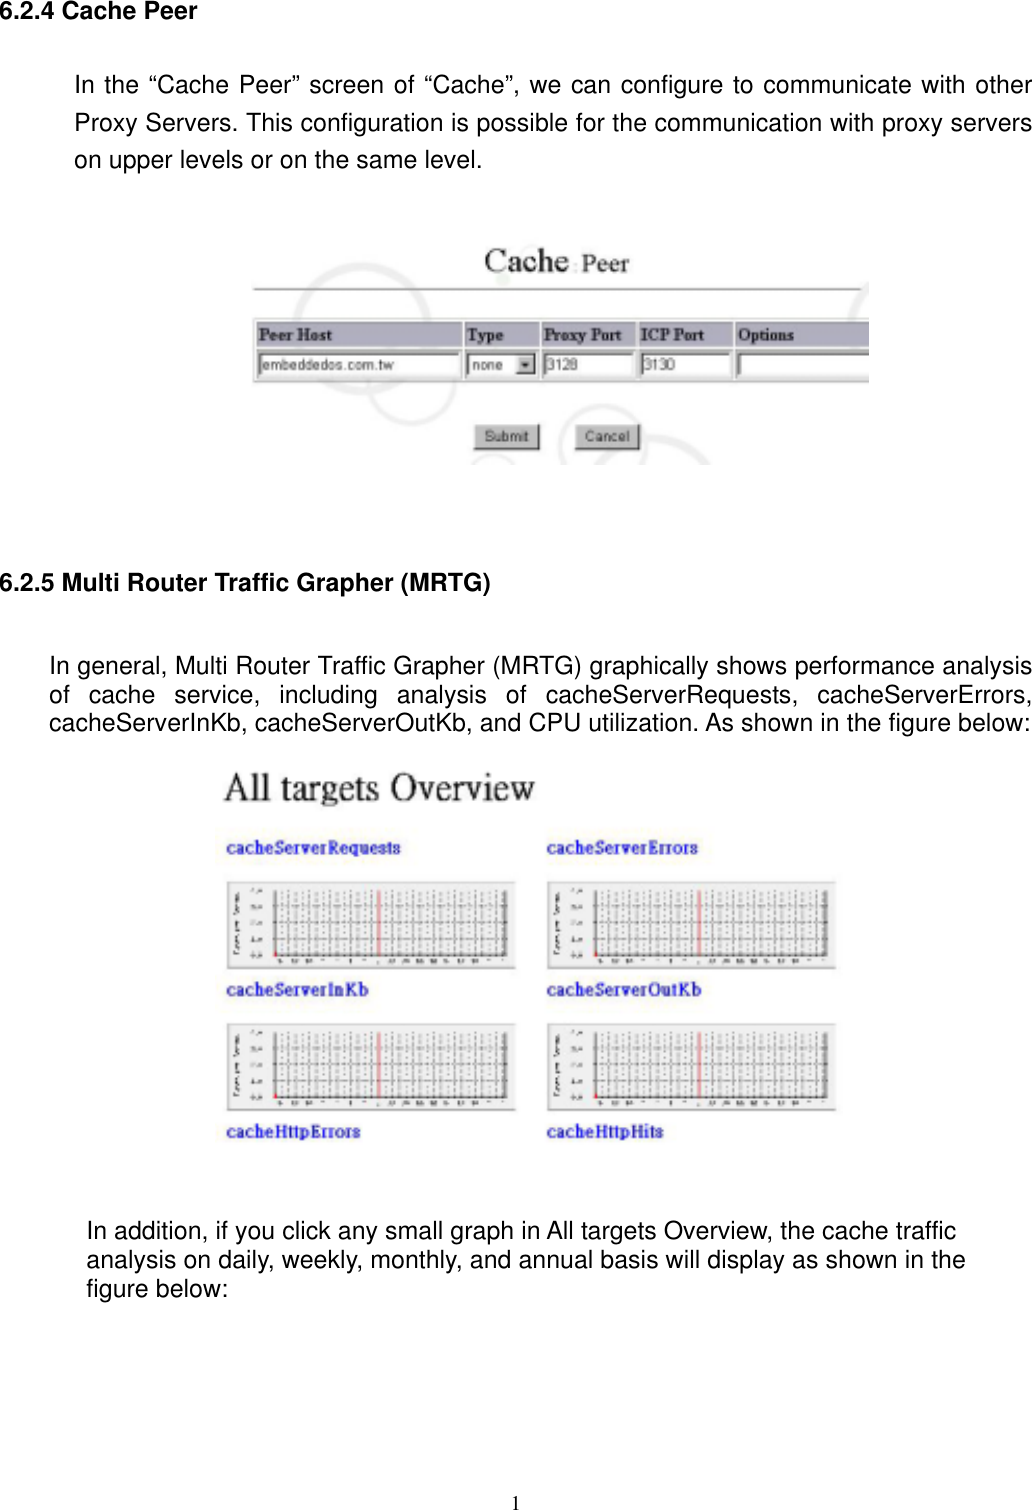  16.2.4 Cache Peer In the “Cache Peer” screen of “Cache”, we can configure to communicate with other Proxy Servers. This configuration is possible for the communication with proxy servers on upper levels or on the same level.    6.2.5 Multi Router Traffic Grapher (MRTG) In general, Multi Router Traffic Grapher (MRTG) graphically shows performance analysis of cache service, including analysis of cacheServerRequests, cacheServerErrors, cacheServerInKb, cacheServerOutKb, and CPU utilization. As shown in the figure below:   In addition, if you click any small graph in All targets Overview, the cache traffic analysis on daily, weekly, monthly, and annual basis will display as shown in the figure below: 